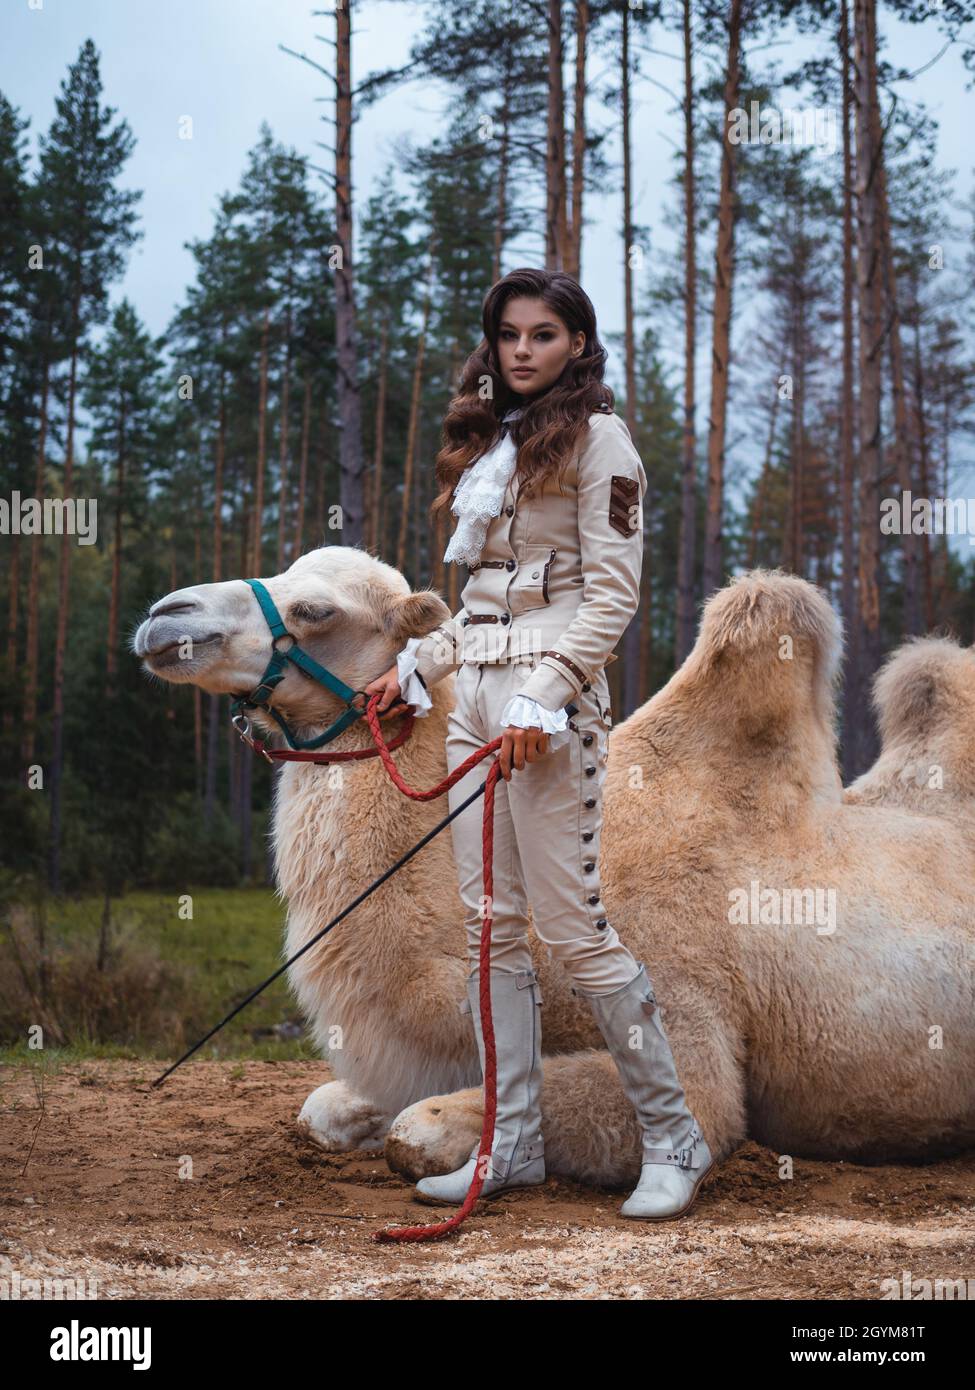 Young beautiful brunette in a rider costume next to a big white camel with two humps, forest in the background Stock Photo